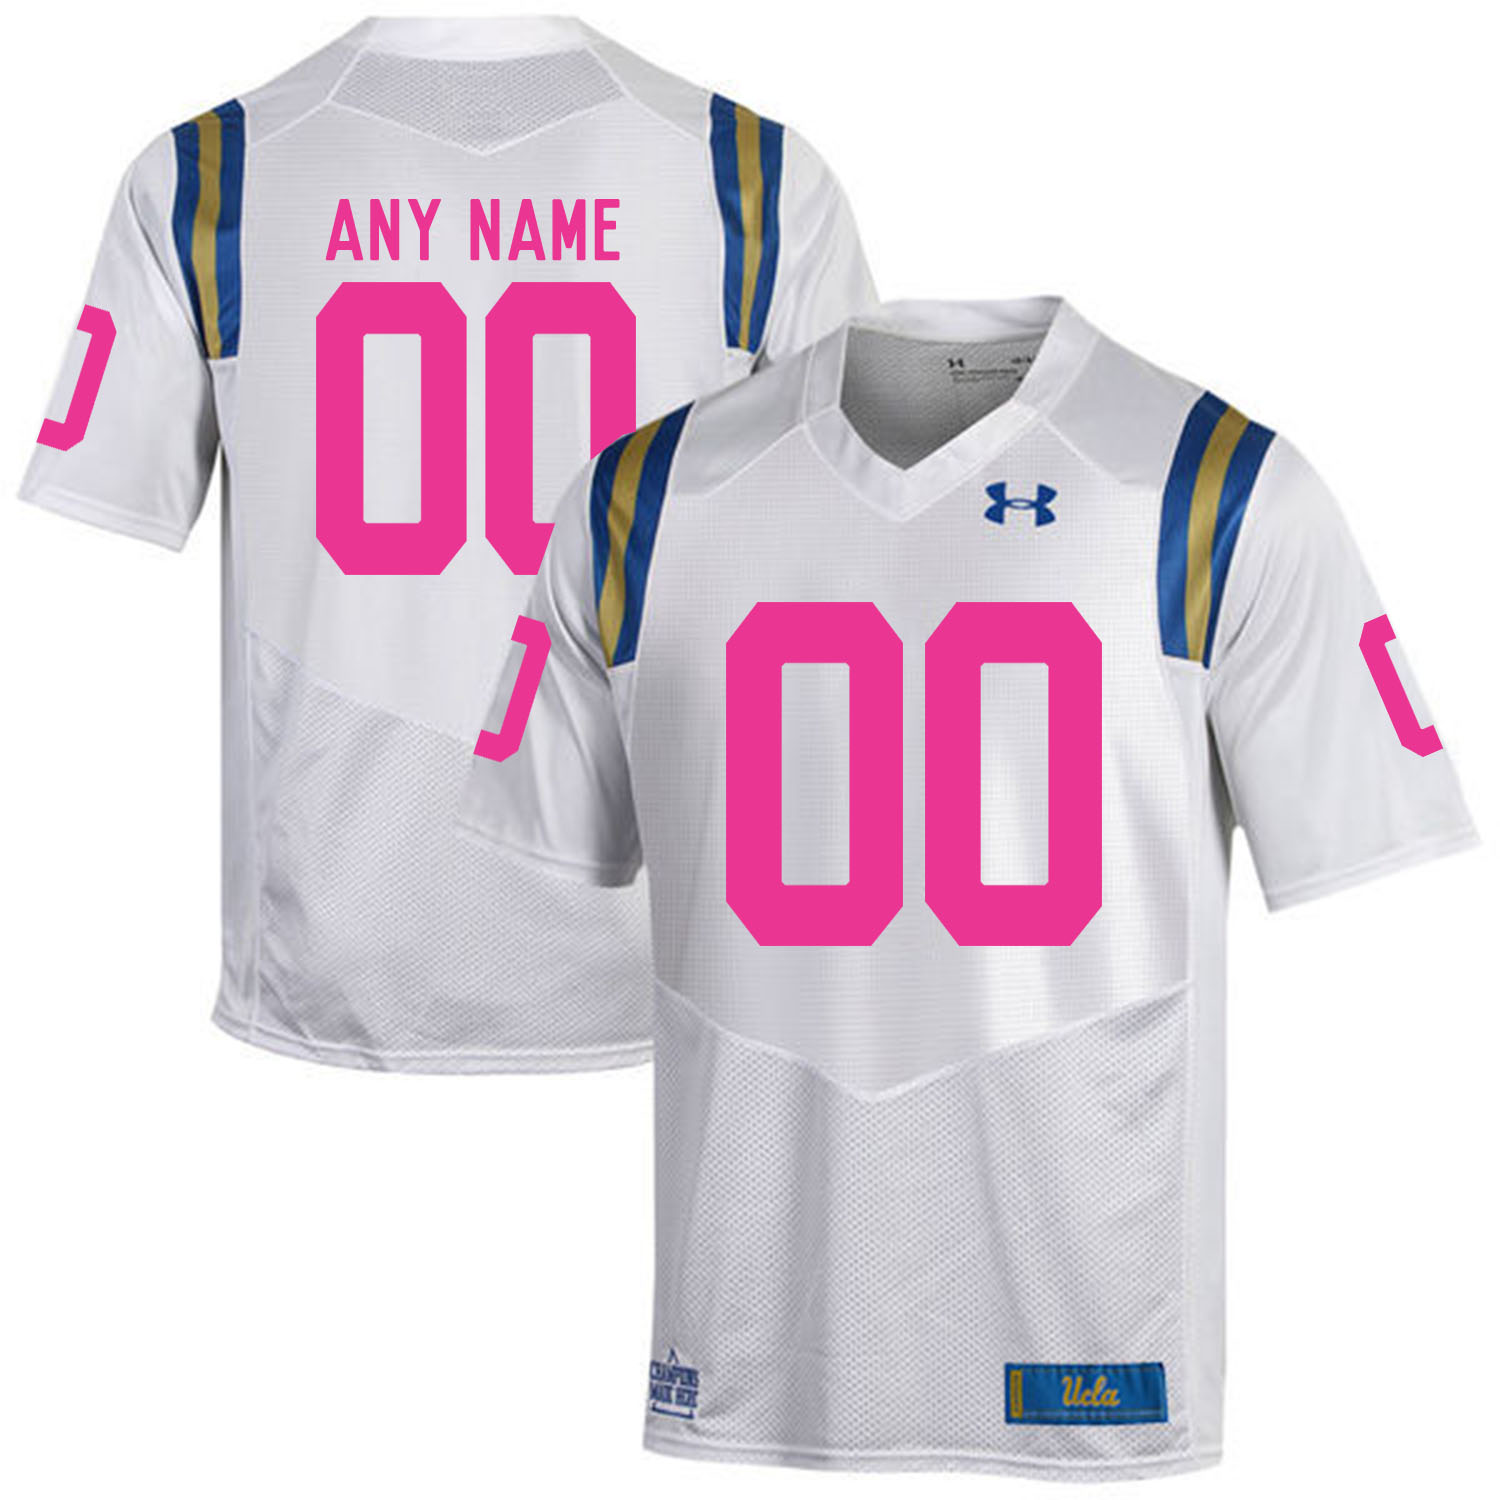 UCLA Bruins White Men's Customized 2018 Breast Cancer Awareness College Football Jersey